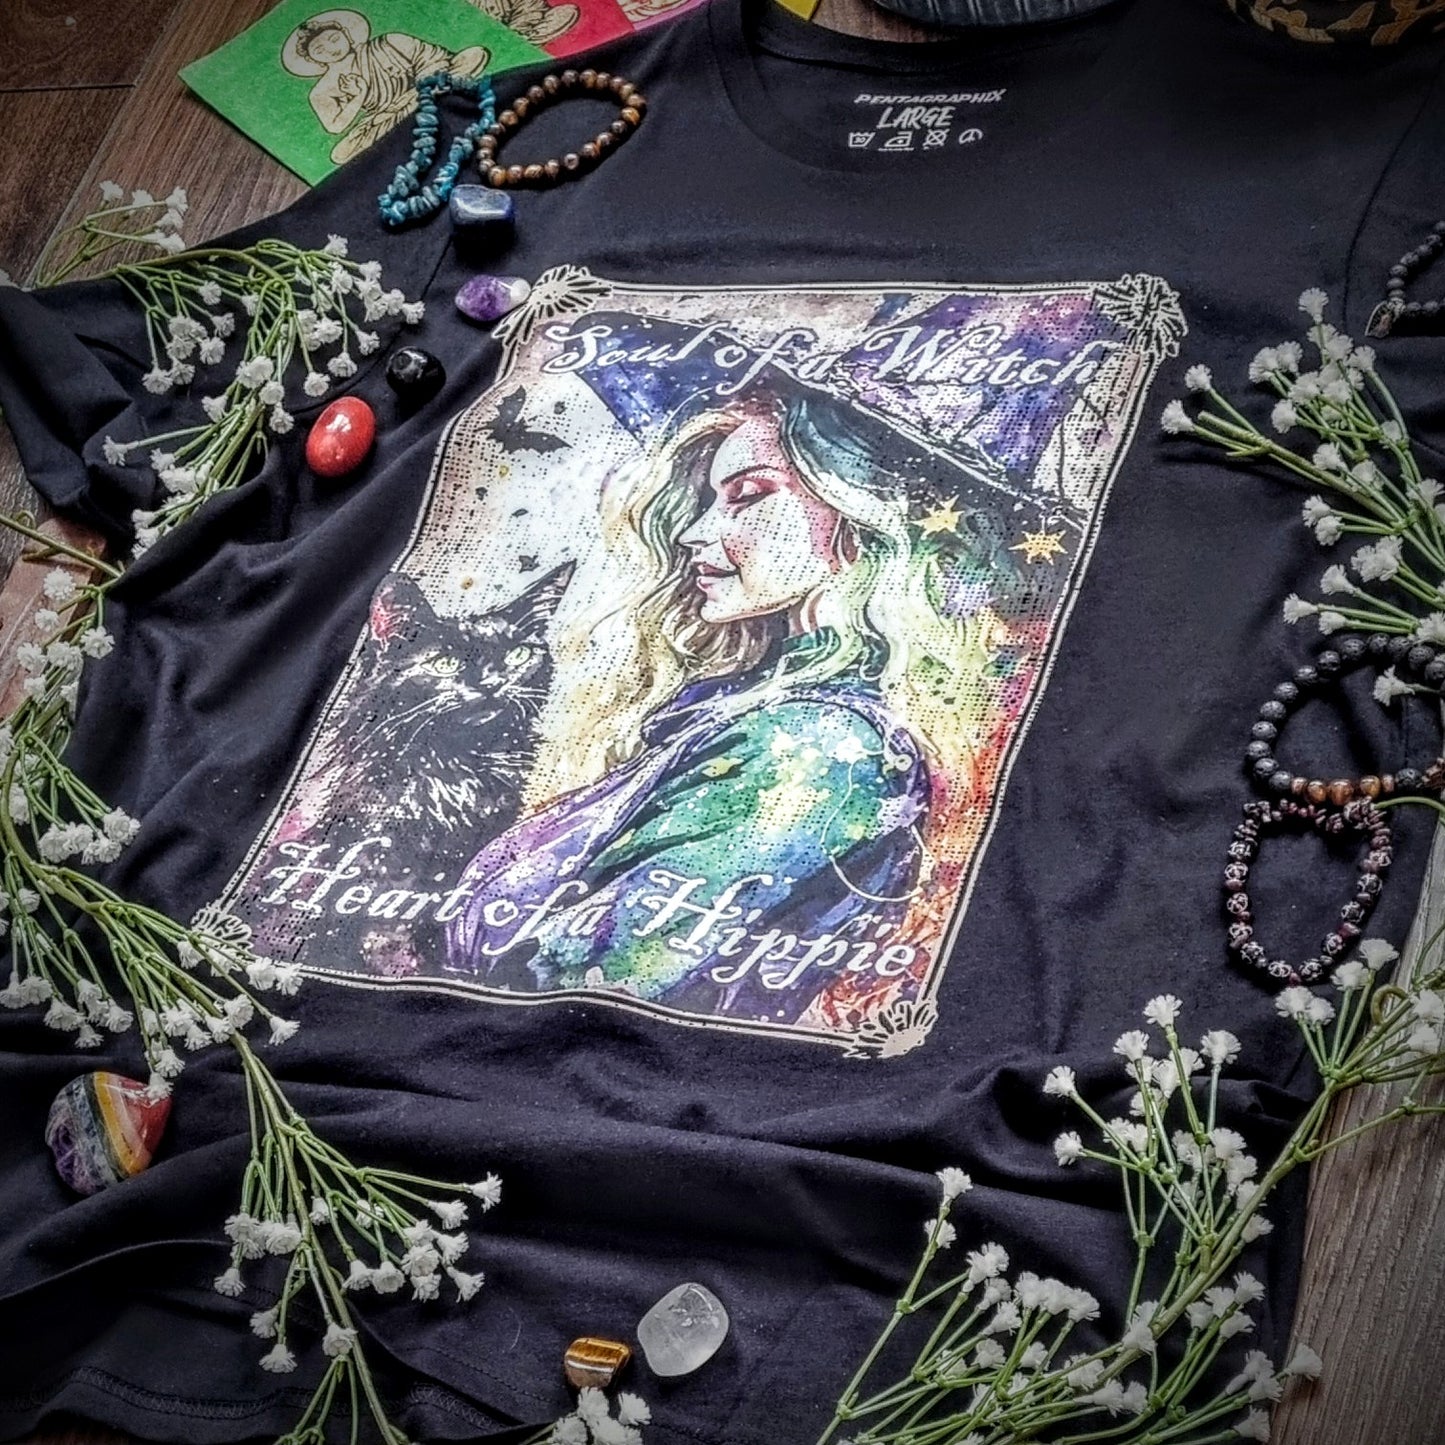 Soul Of A Witch Heart Of A Hippie T-Shirt